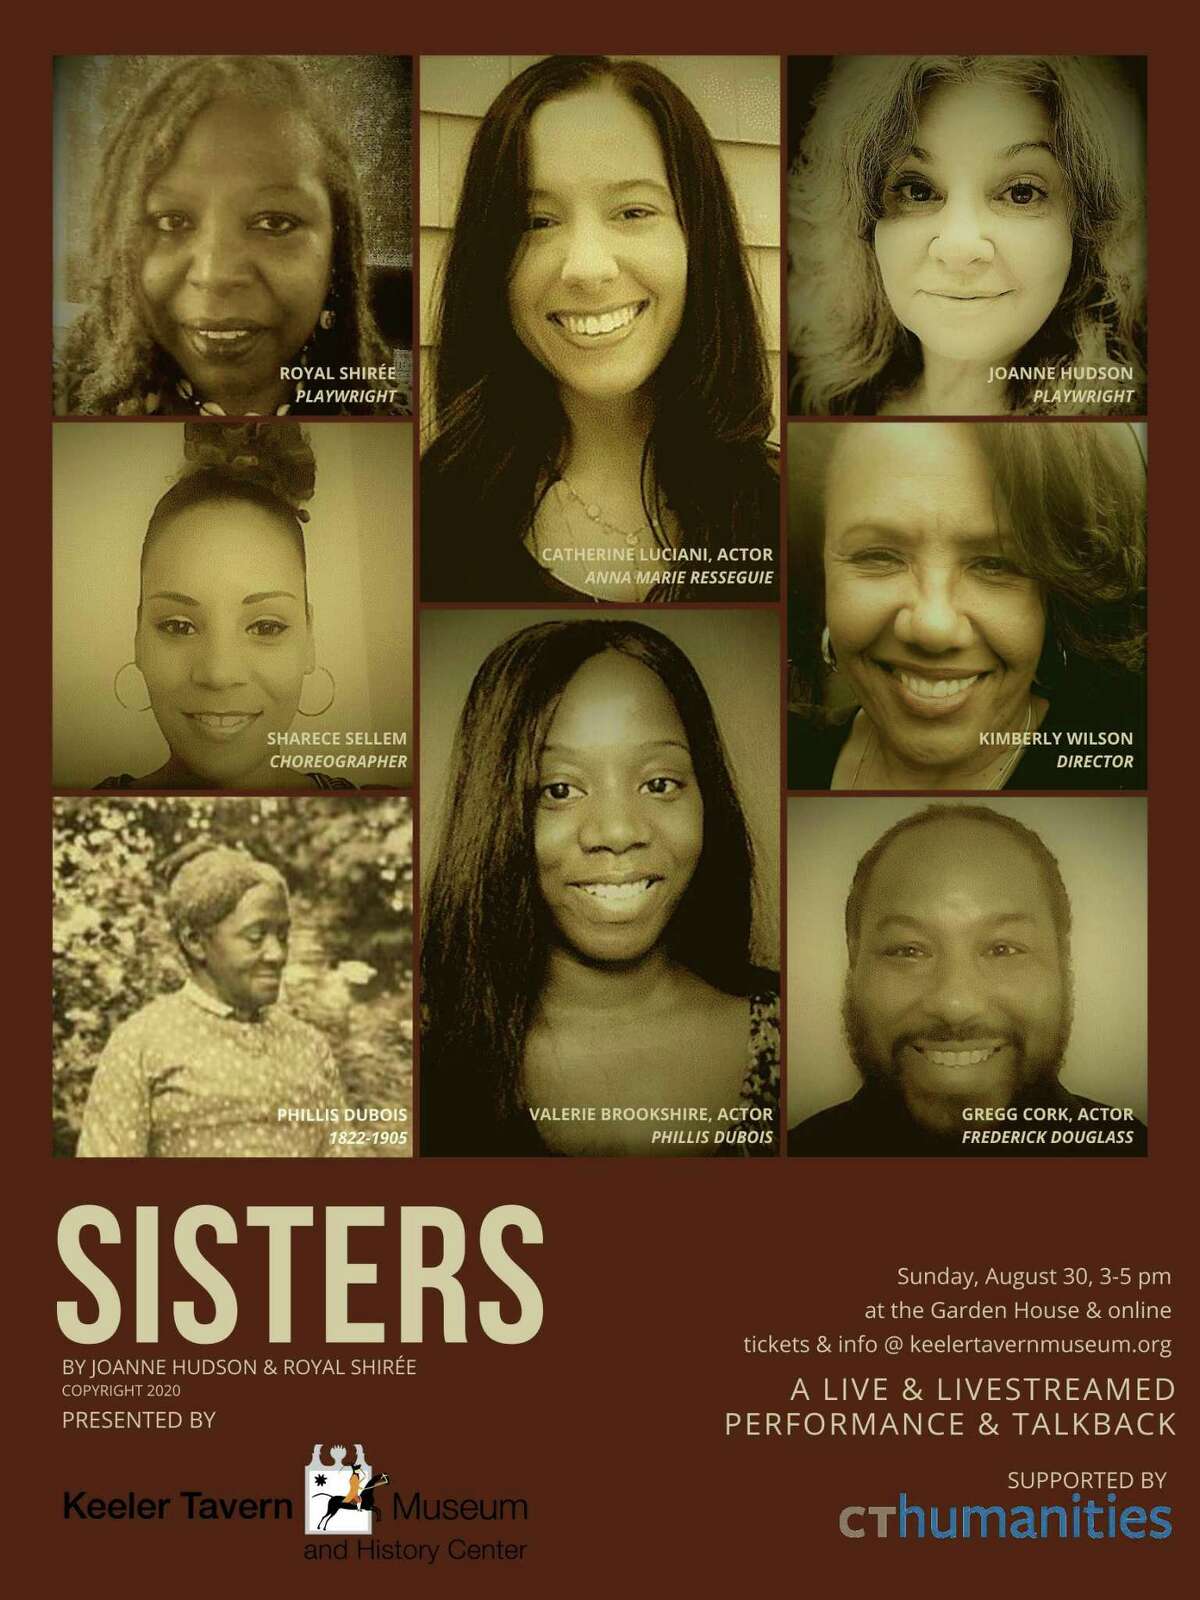 Sisters playwrights, director, cast, choreographer, and Phillis Dubois, one of two women who are the subject of the play, presented by Keeler Tavern Museum & History Center and performed live at the Garden House and livestreamed on Aug. 30.